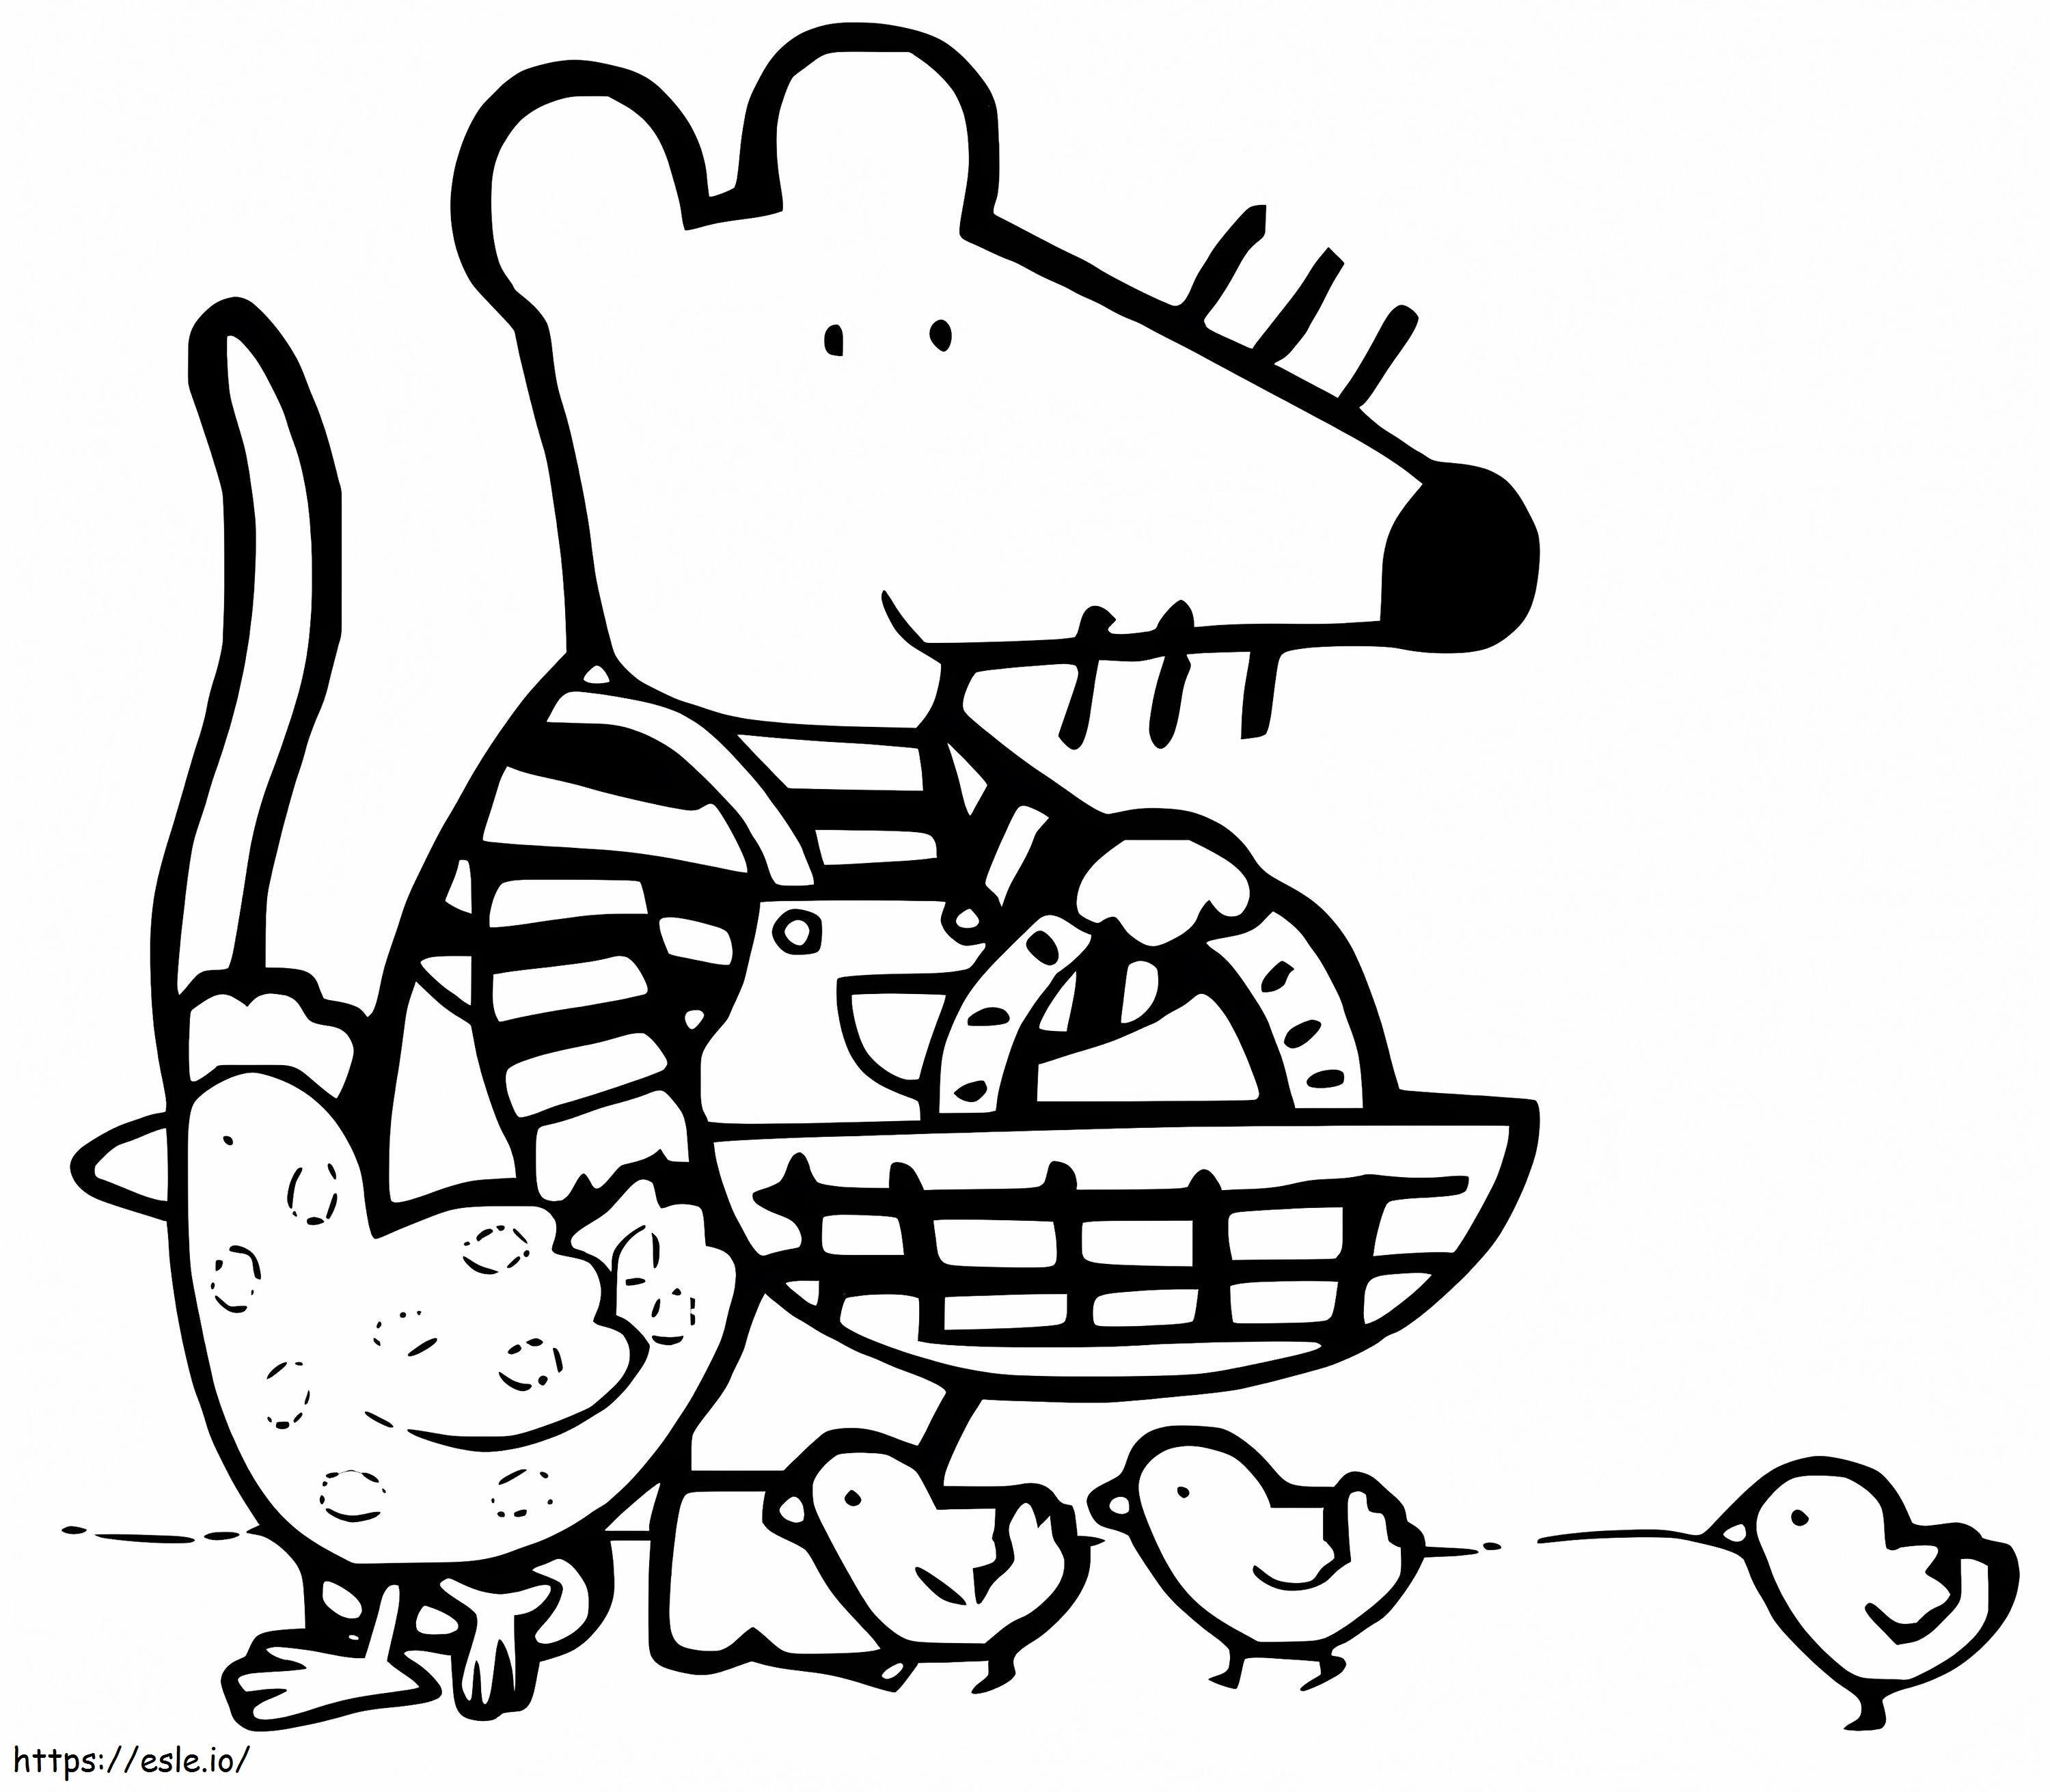 Maisy And Chickens coloring page